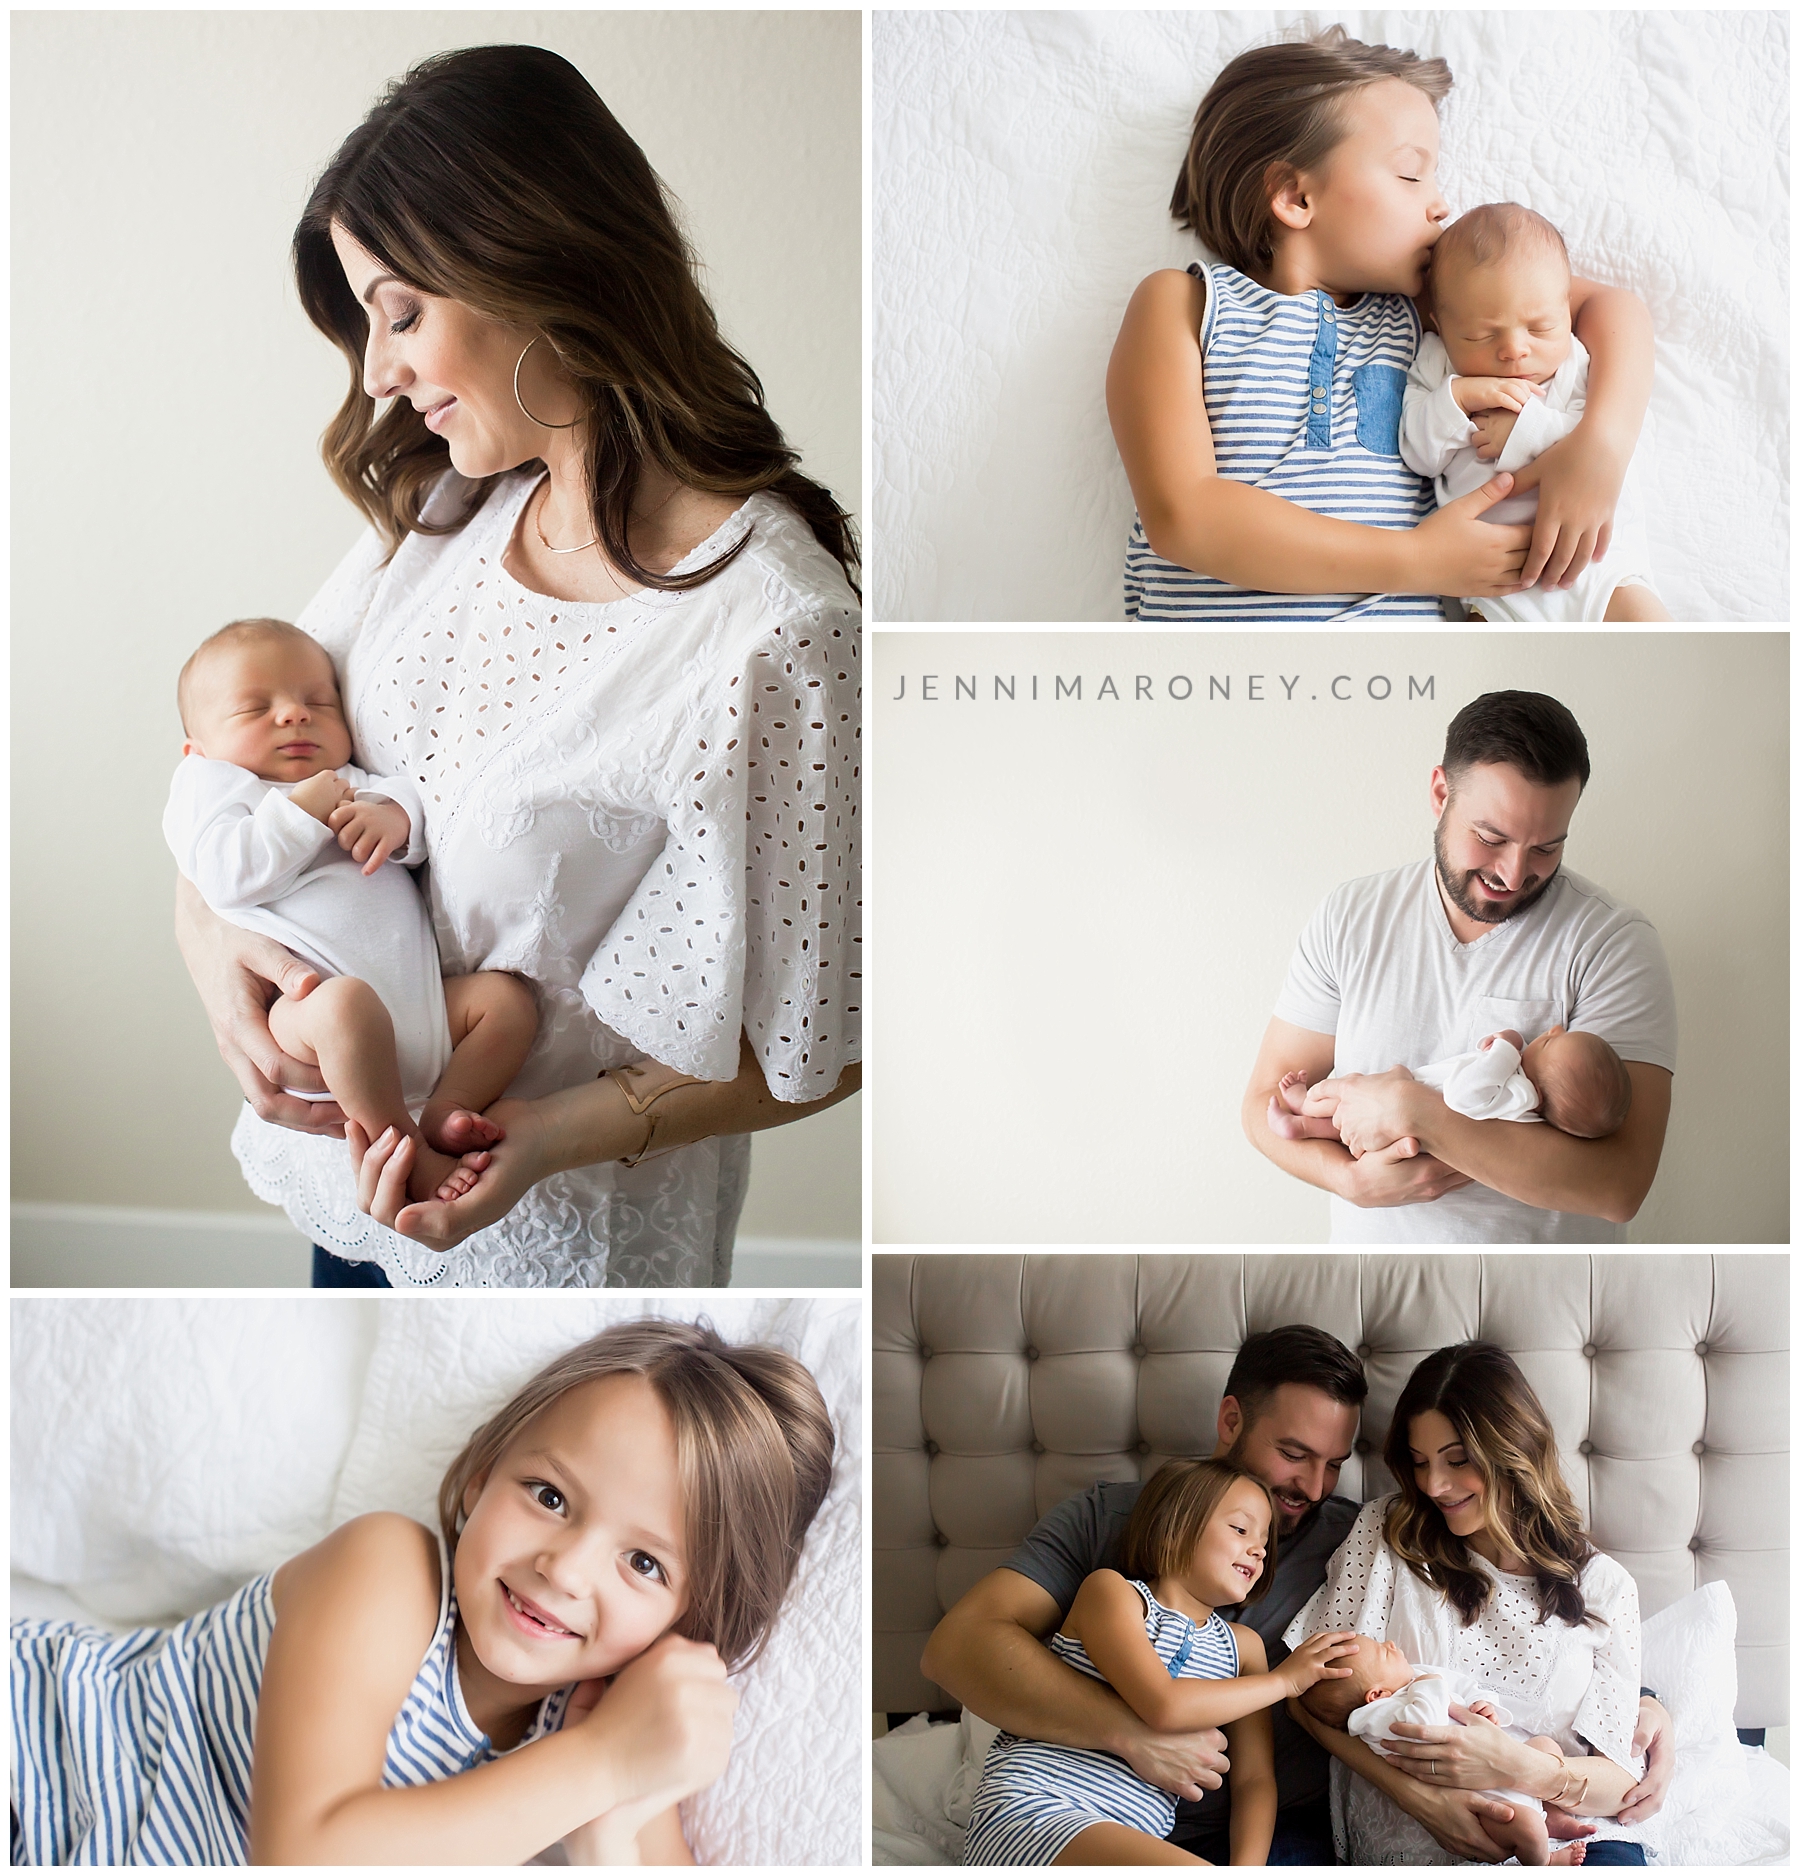 Boulder newborn photographer and boulder newborn photography studio owner, Jenni Maroney specializes in simple, natural newborn photography.